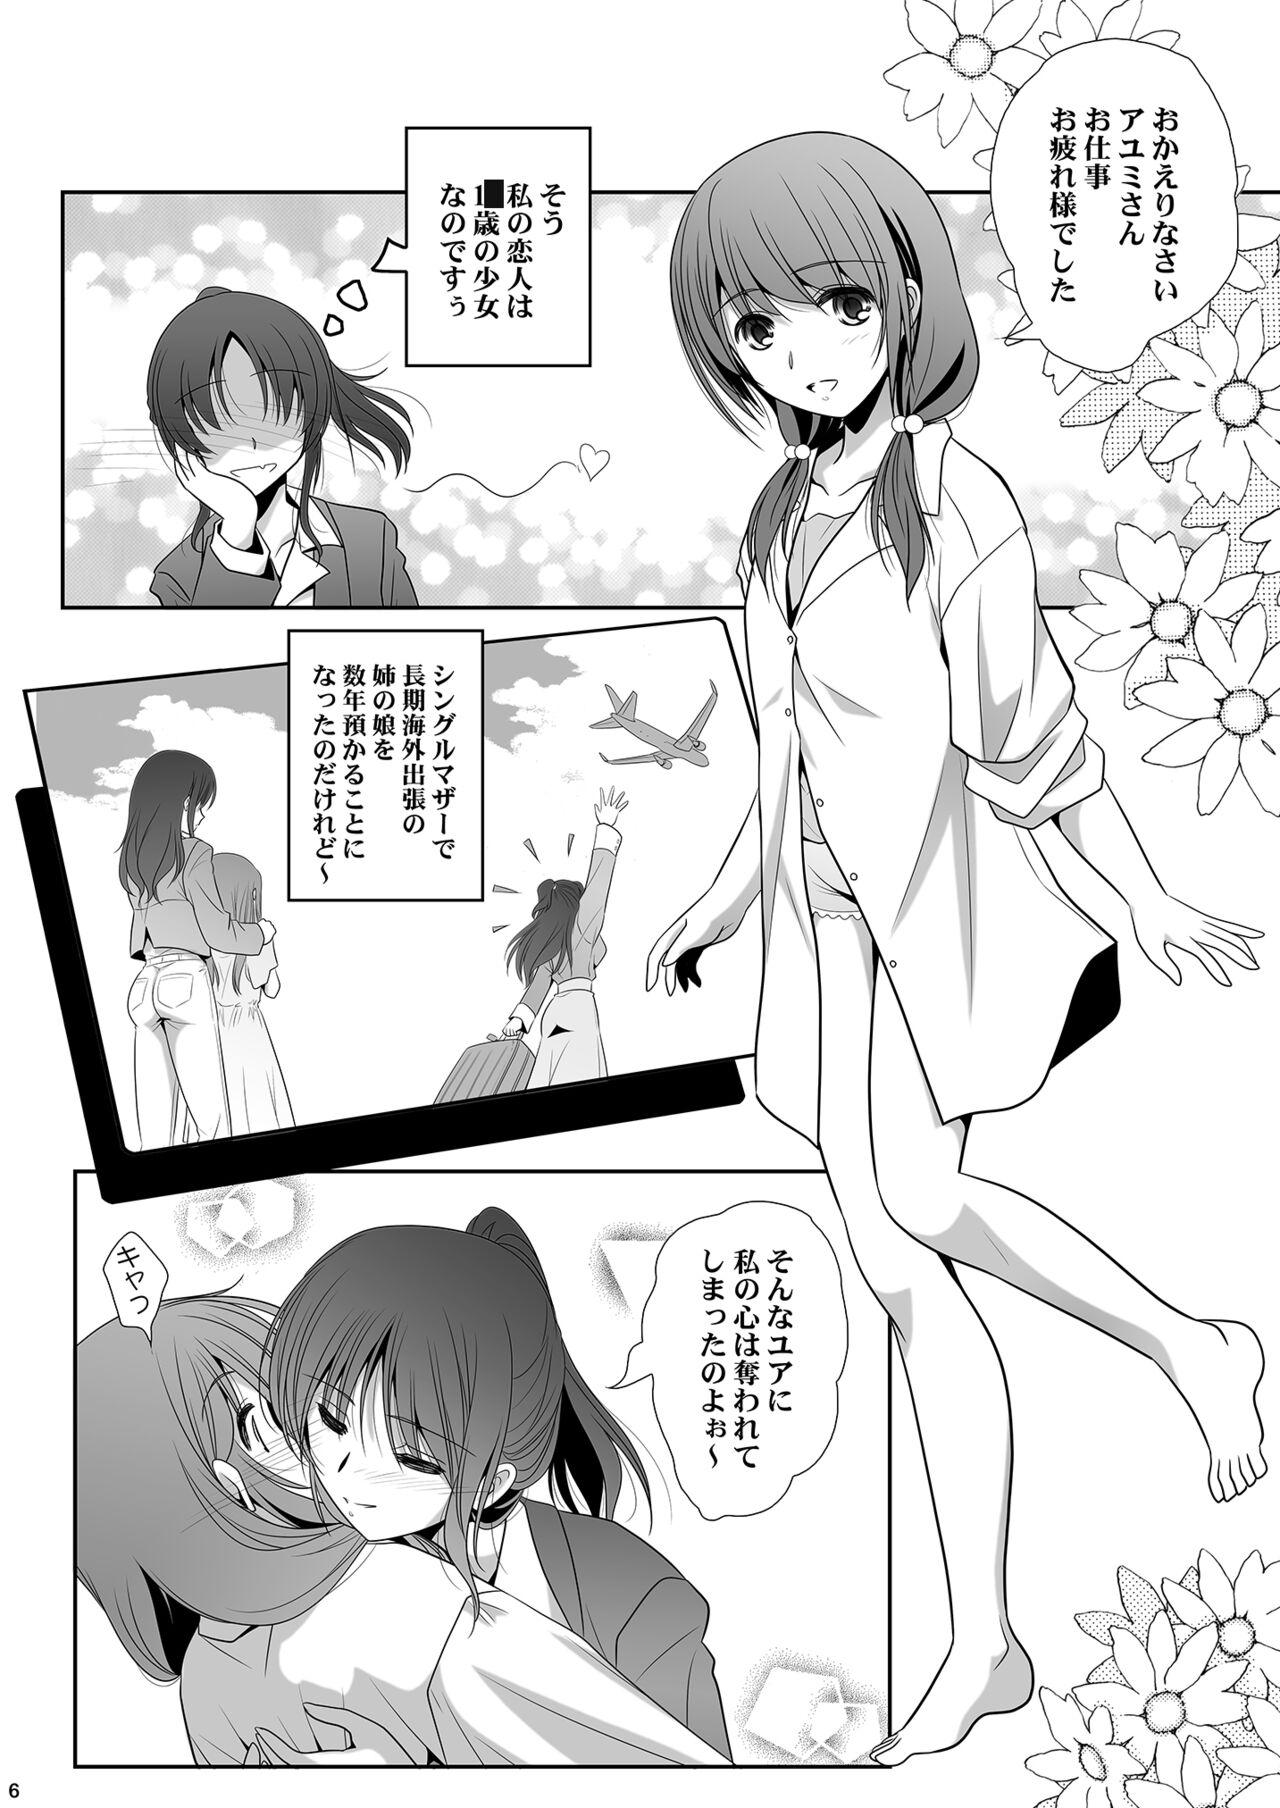 Cutie Toshi no Thirteen - Age Difference is 13 Years - Original Job - Page 6